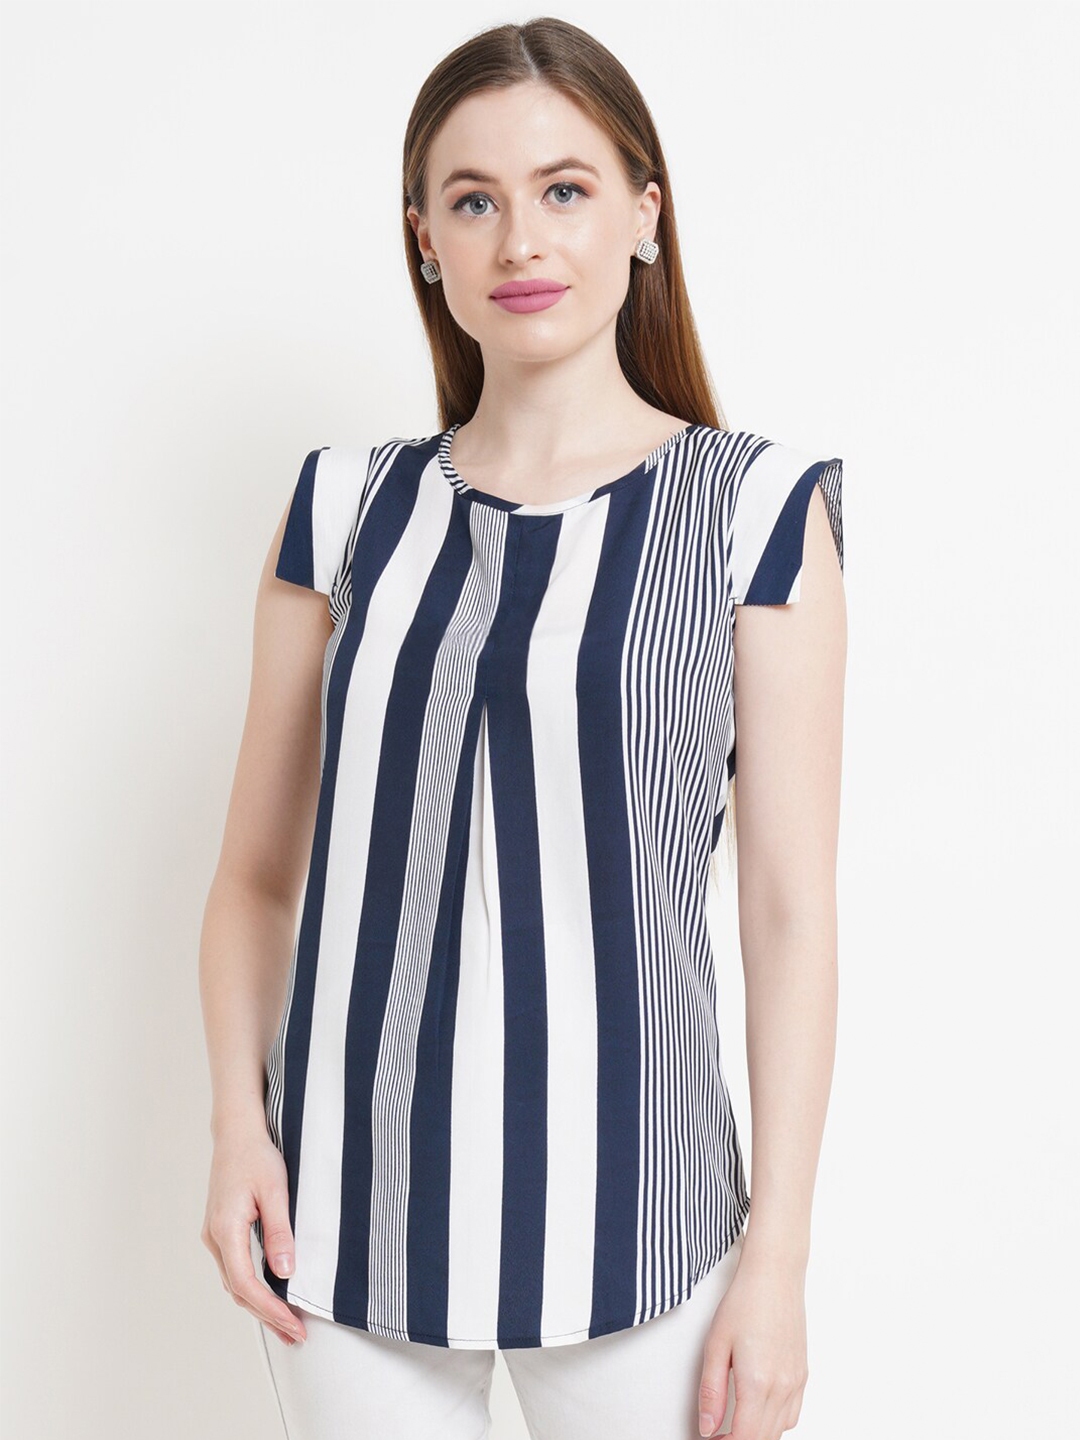 Buy WESTCLO Navy Blue & White Striped Top - Tops for Women 17681416 ...